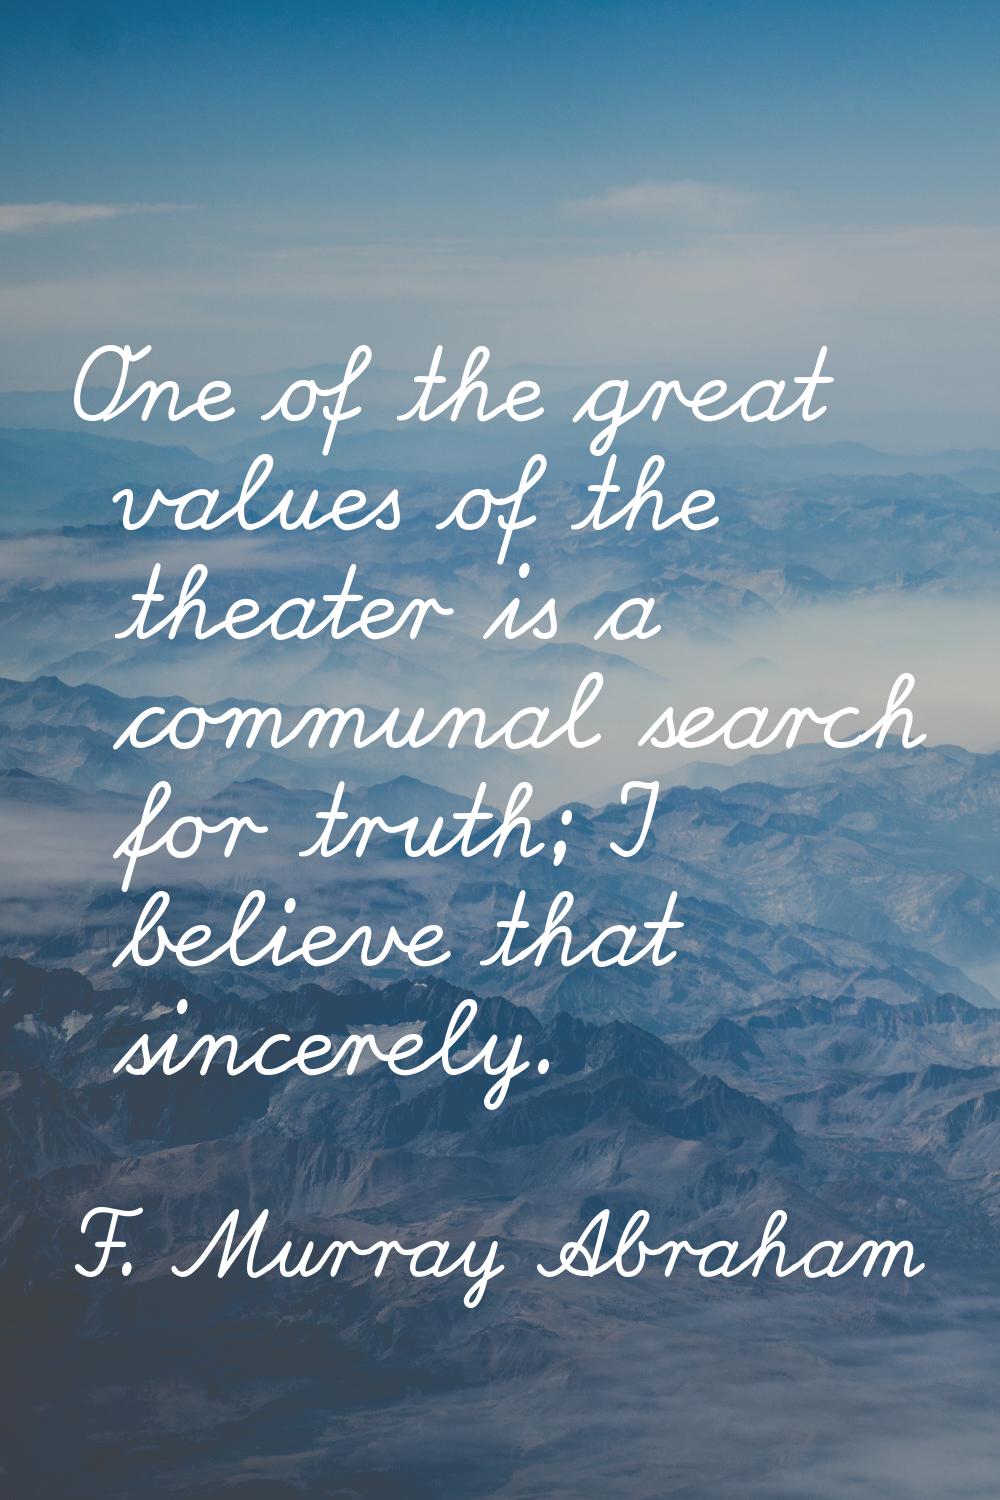 One of the great values of the theater is a communal search for truth; I believe that sincerely.